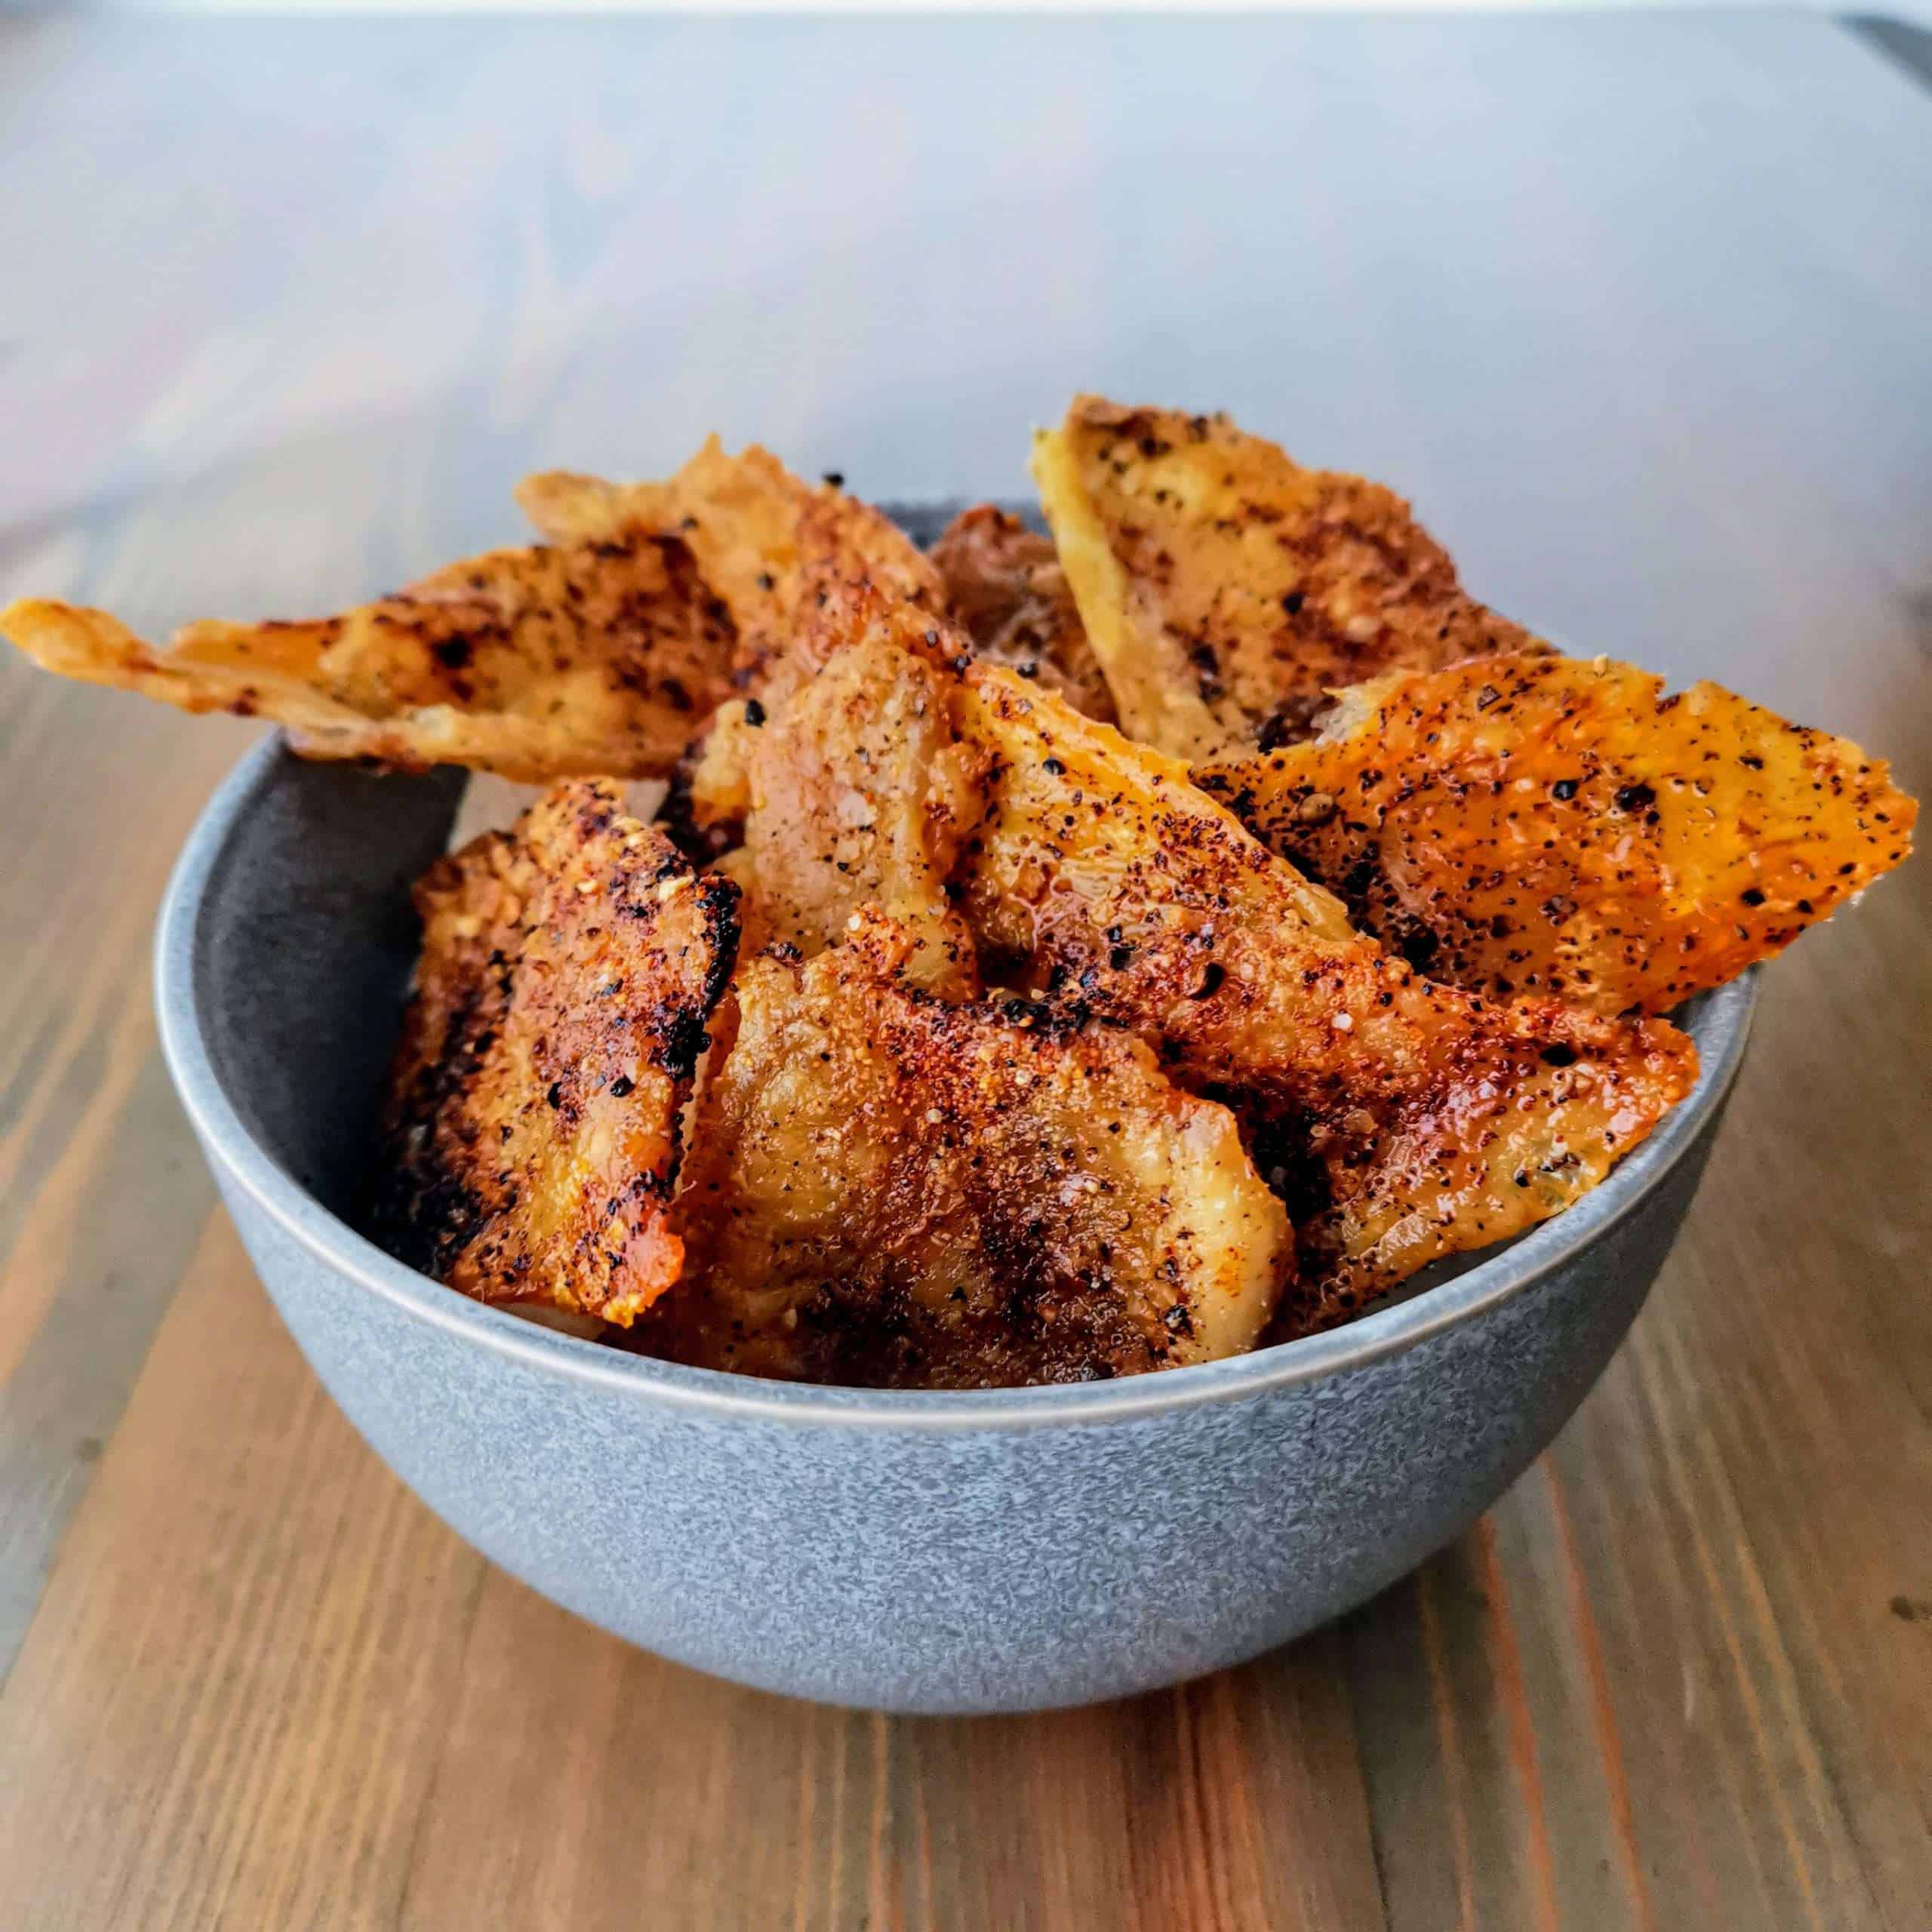 Keto friendly chicken skin nacho chips in a bowl from an angle